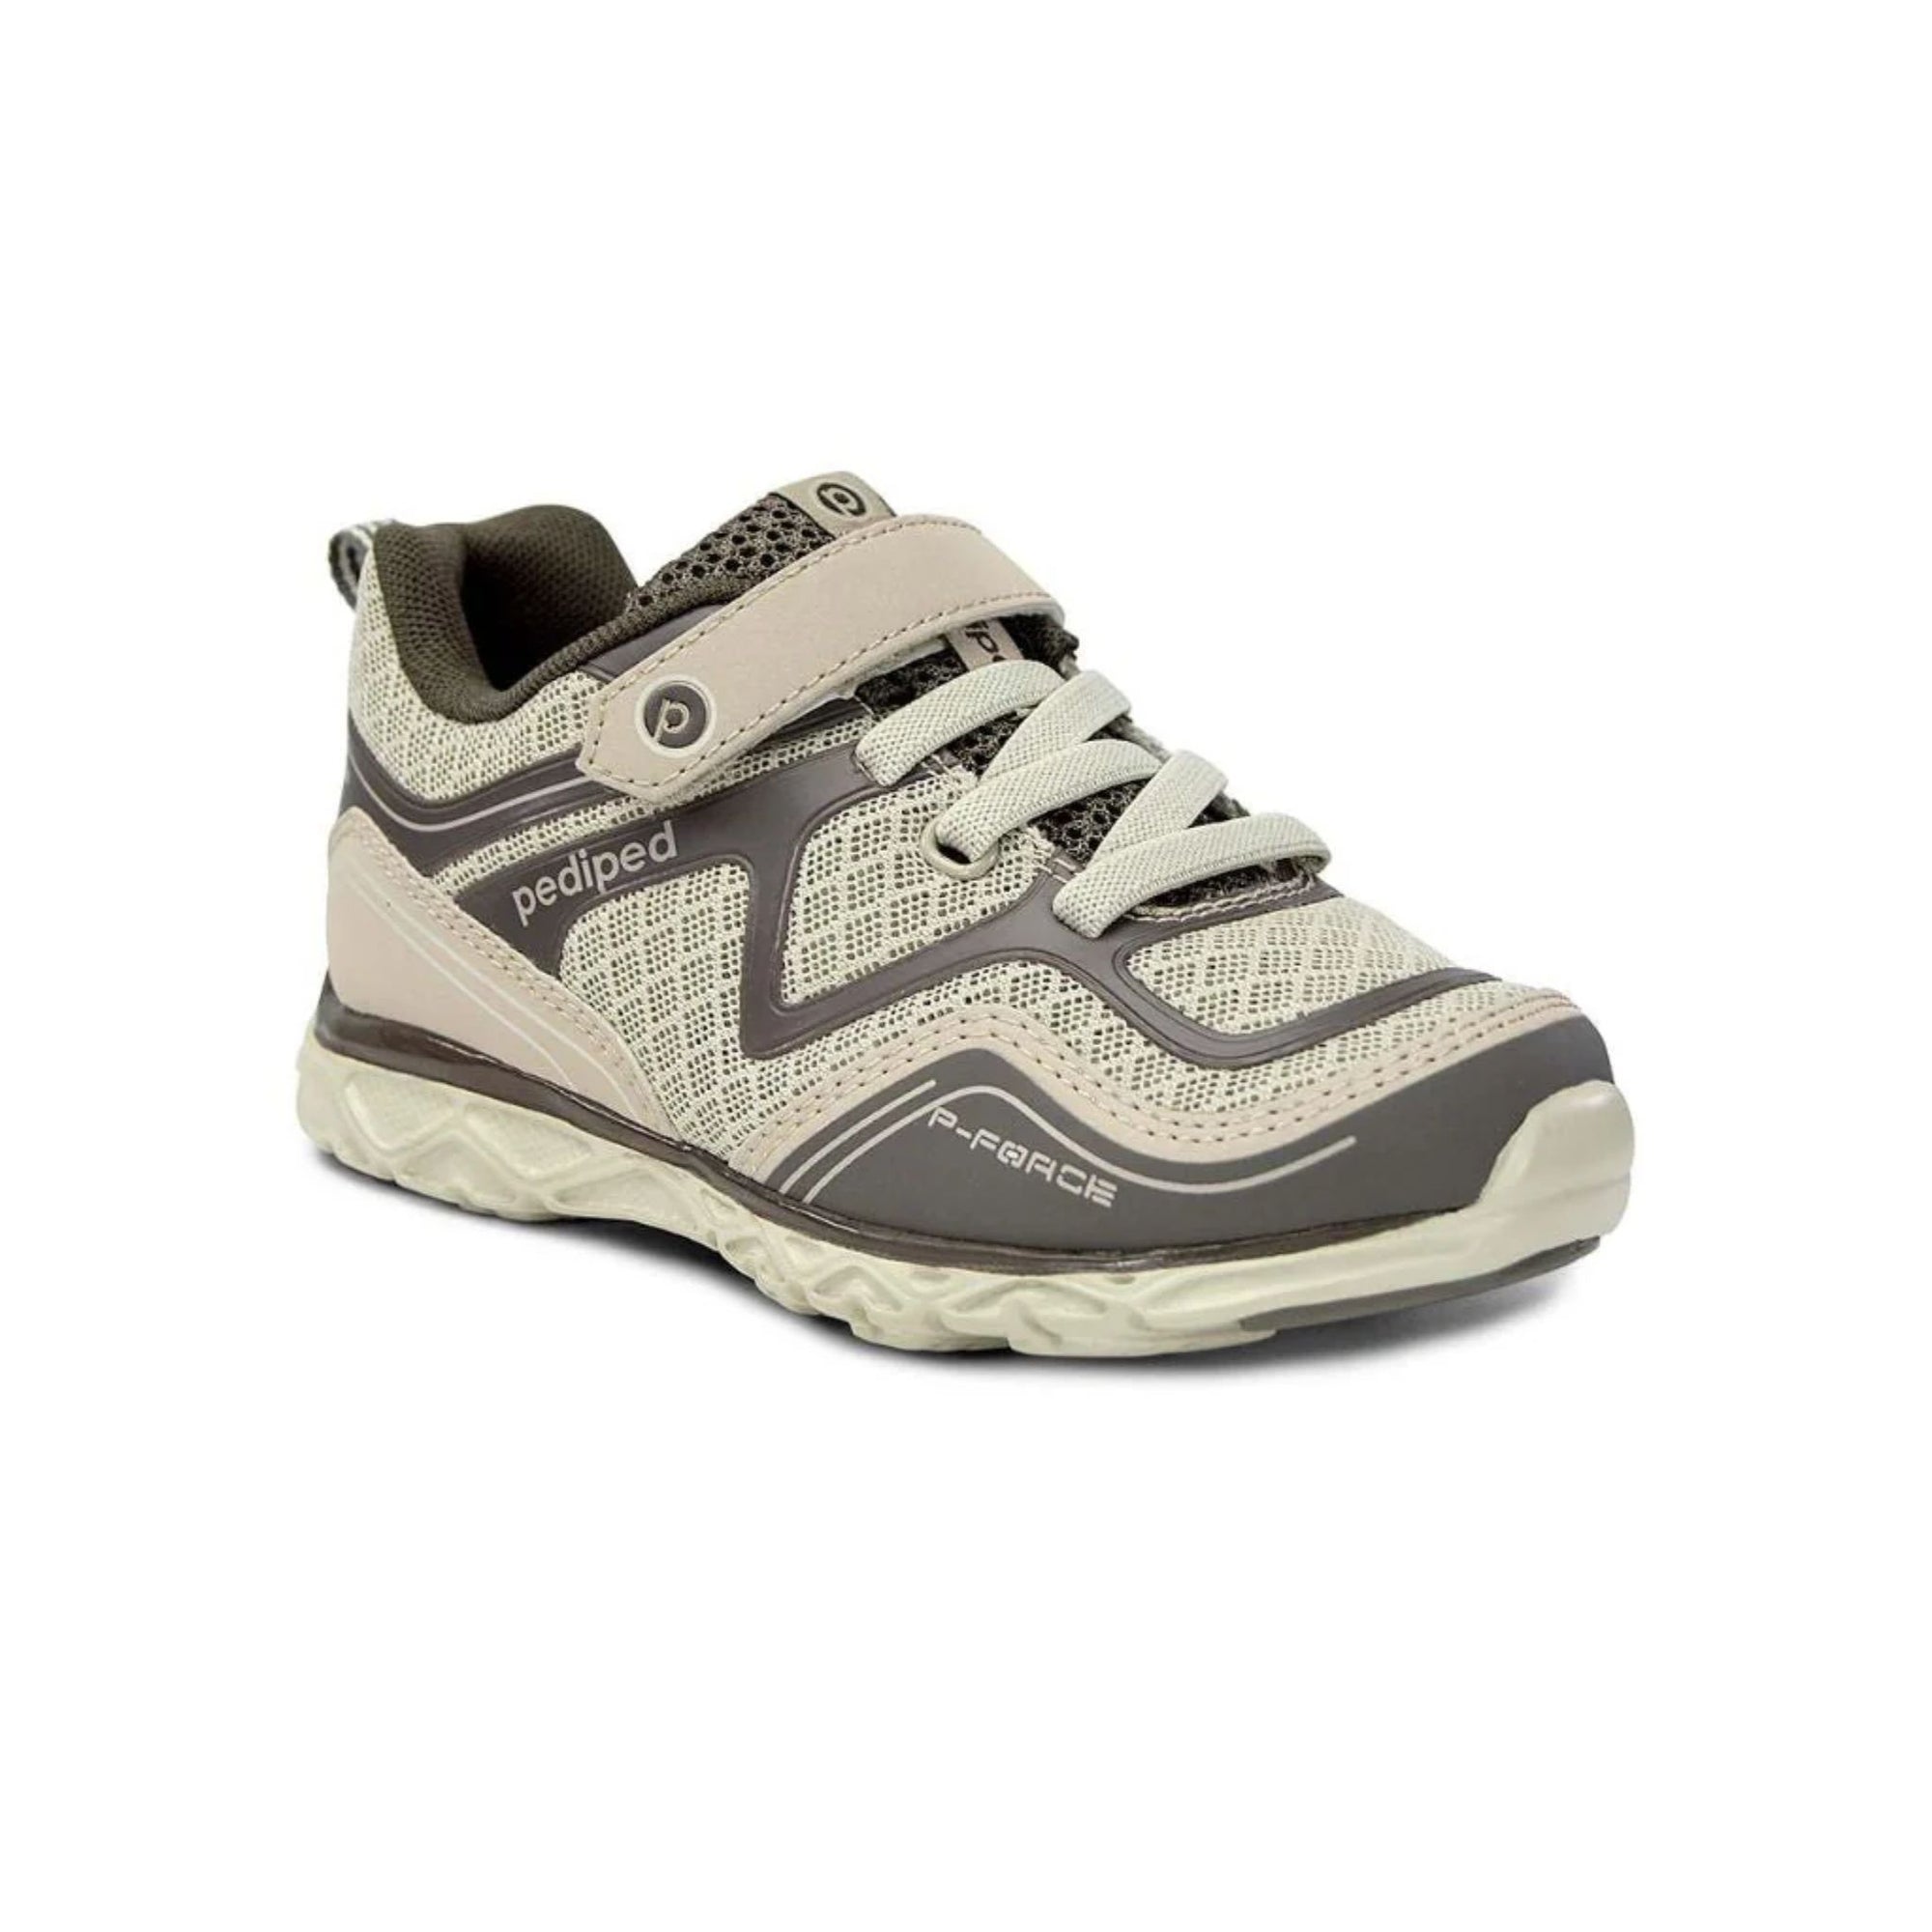 Pediped Flex Force Oyster Athletic Shoes